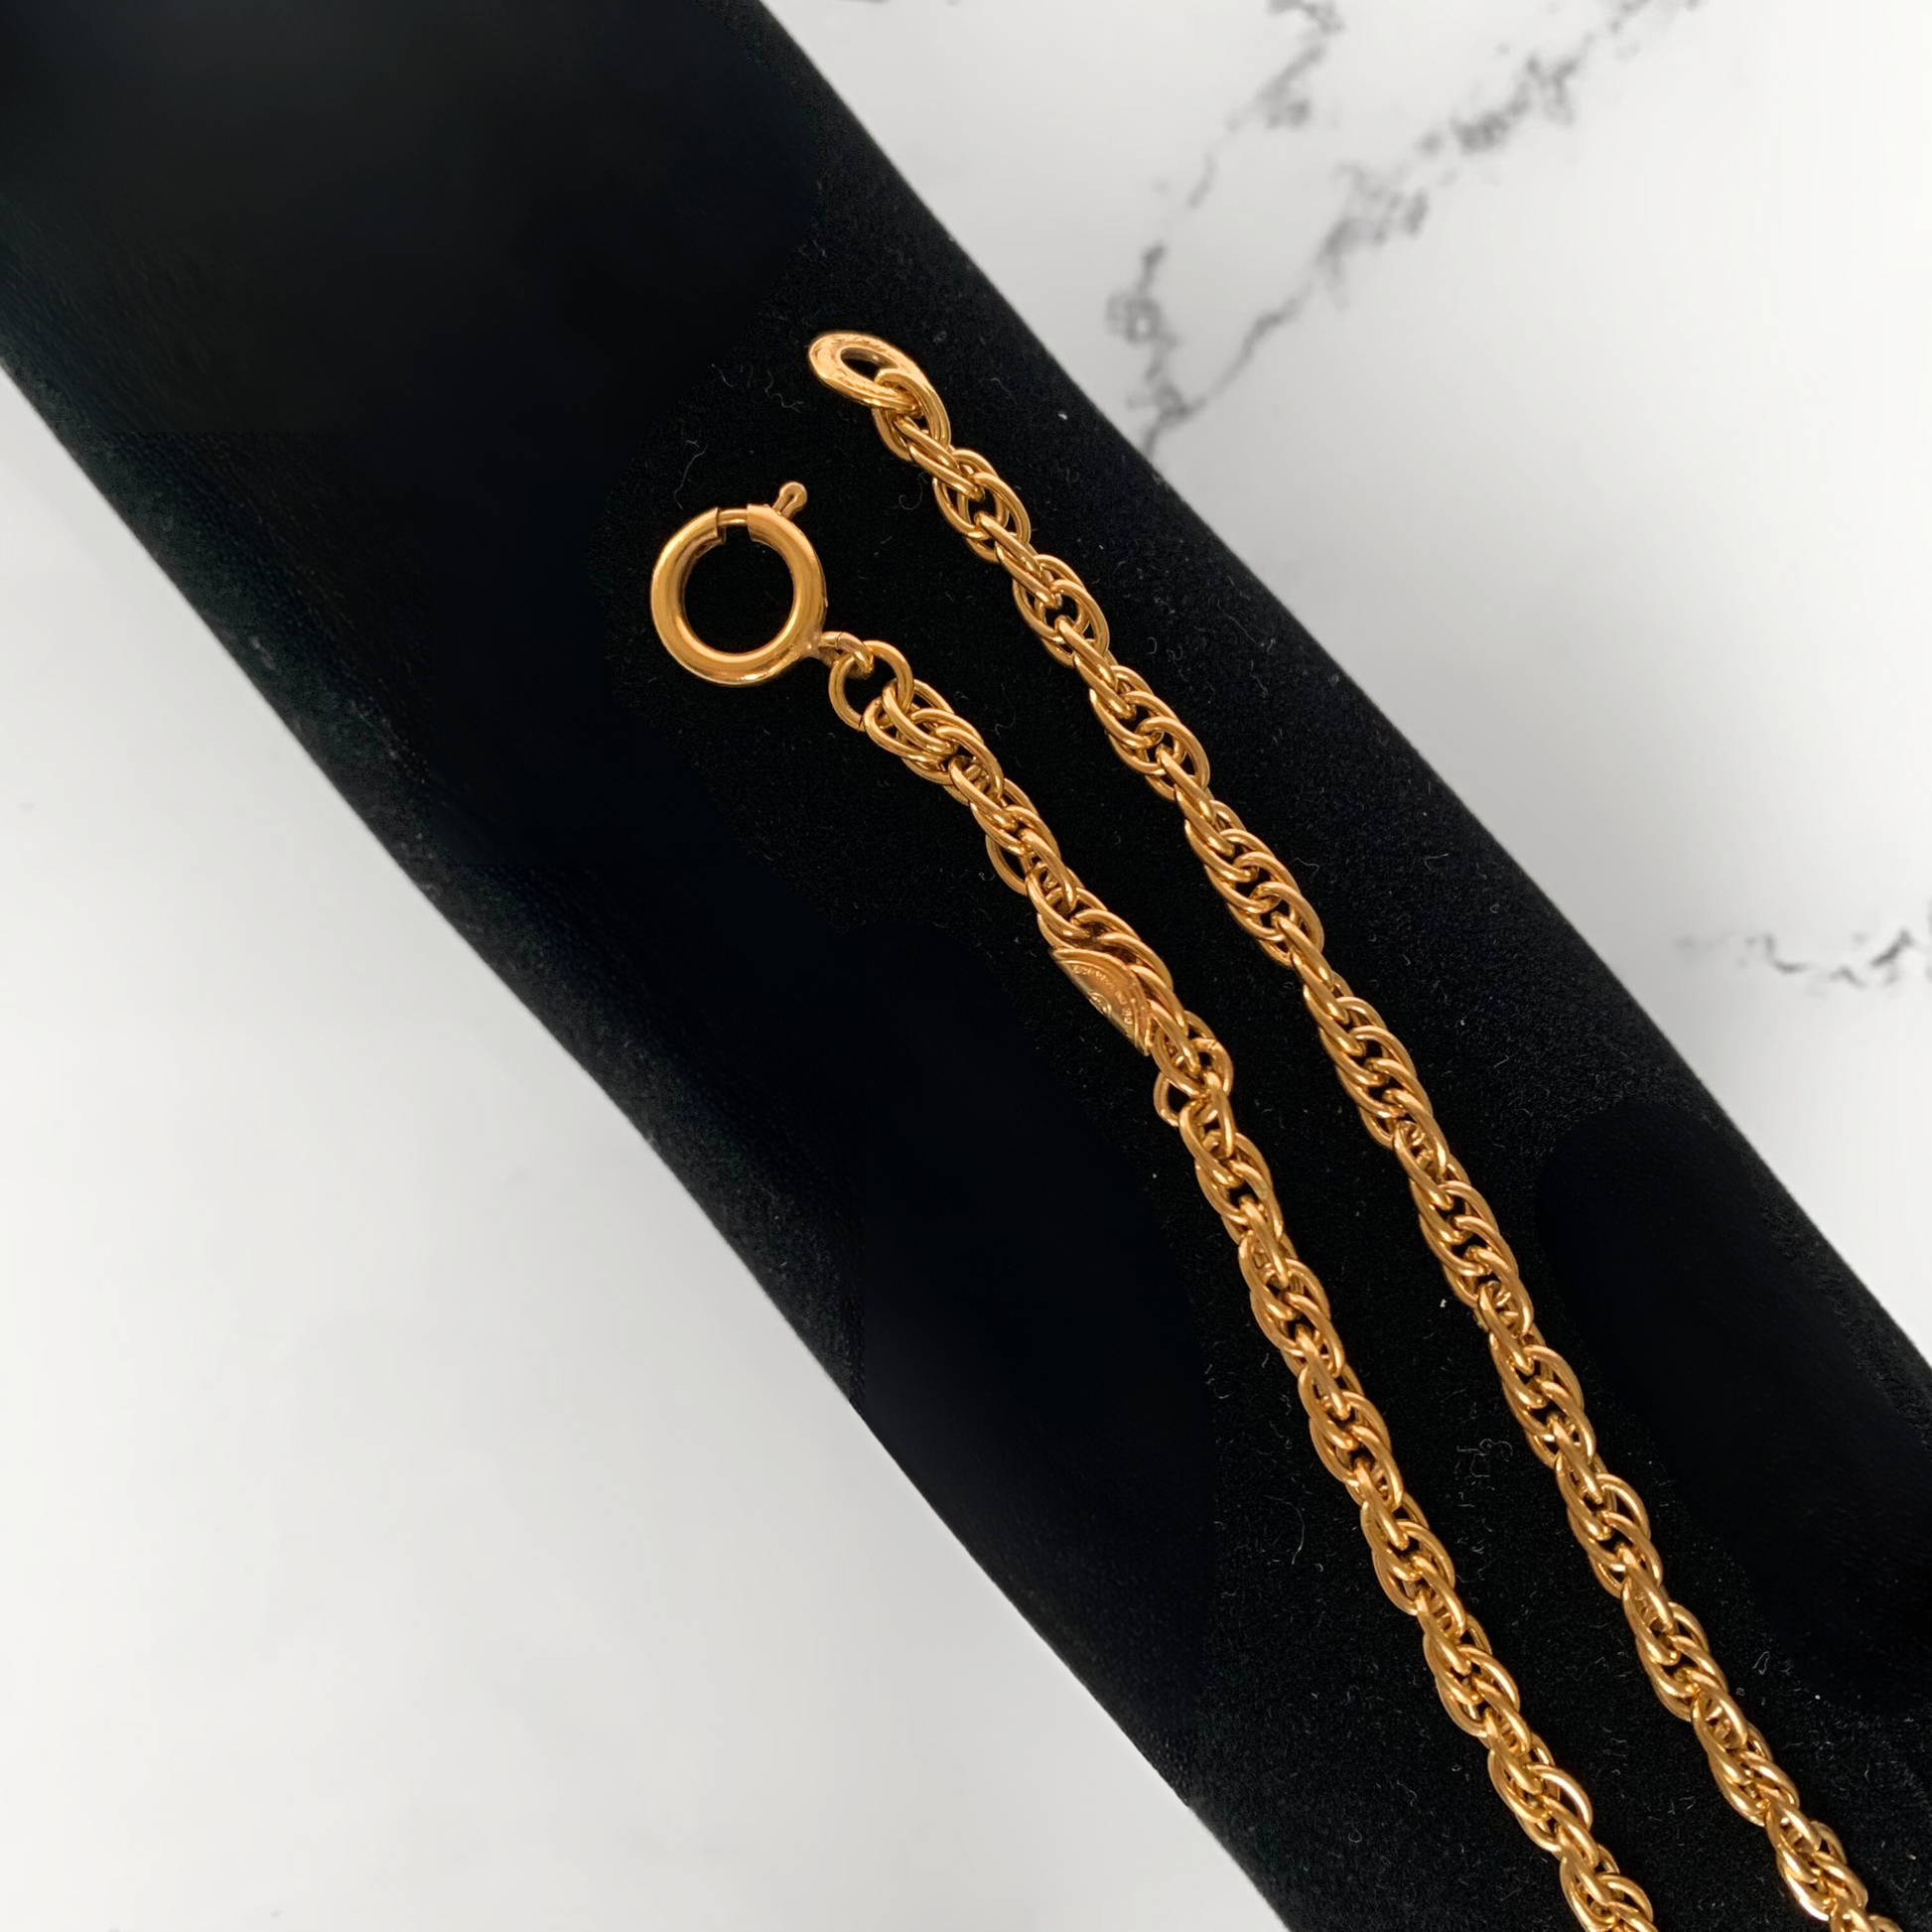 Chanel Chanel Necklace Gold Plated - Necklaces - Etoile Luxury Vintage